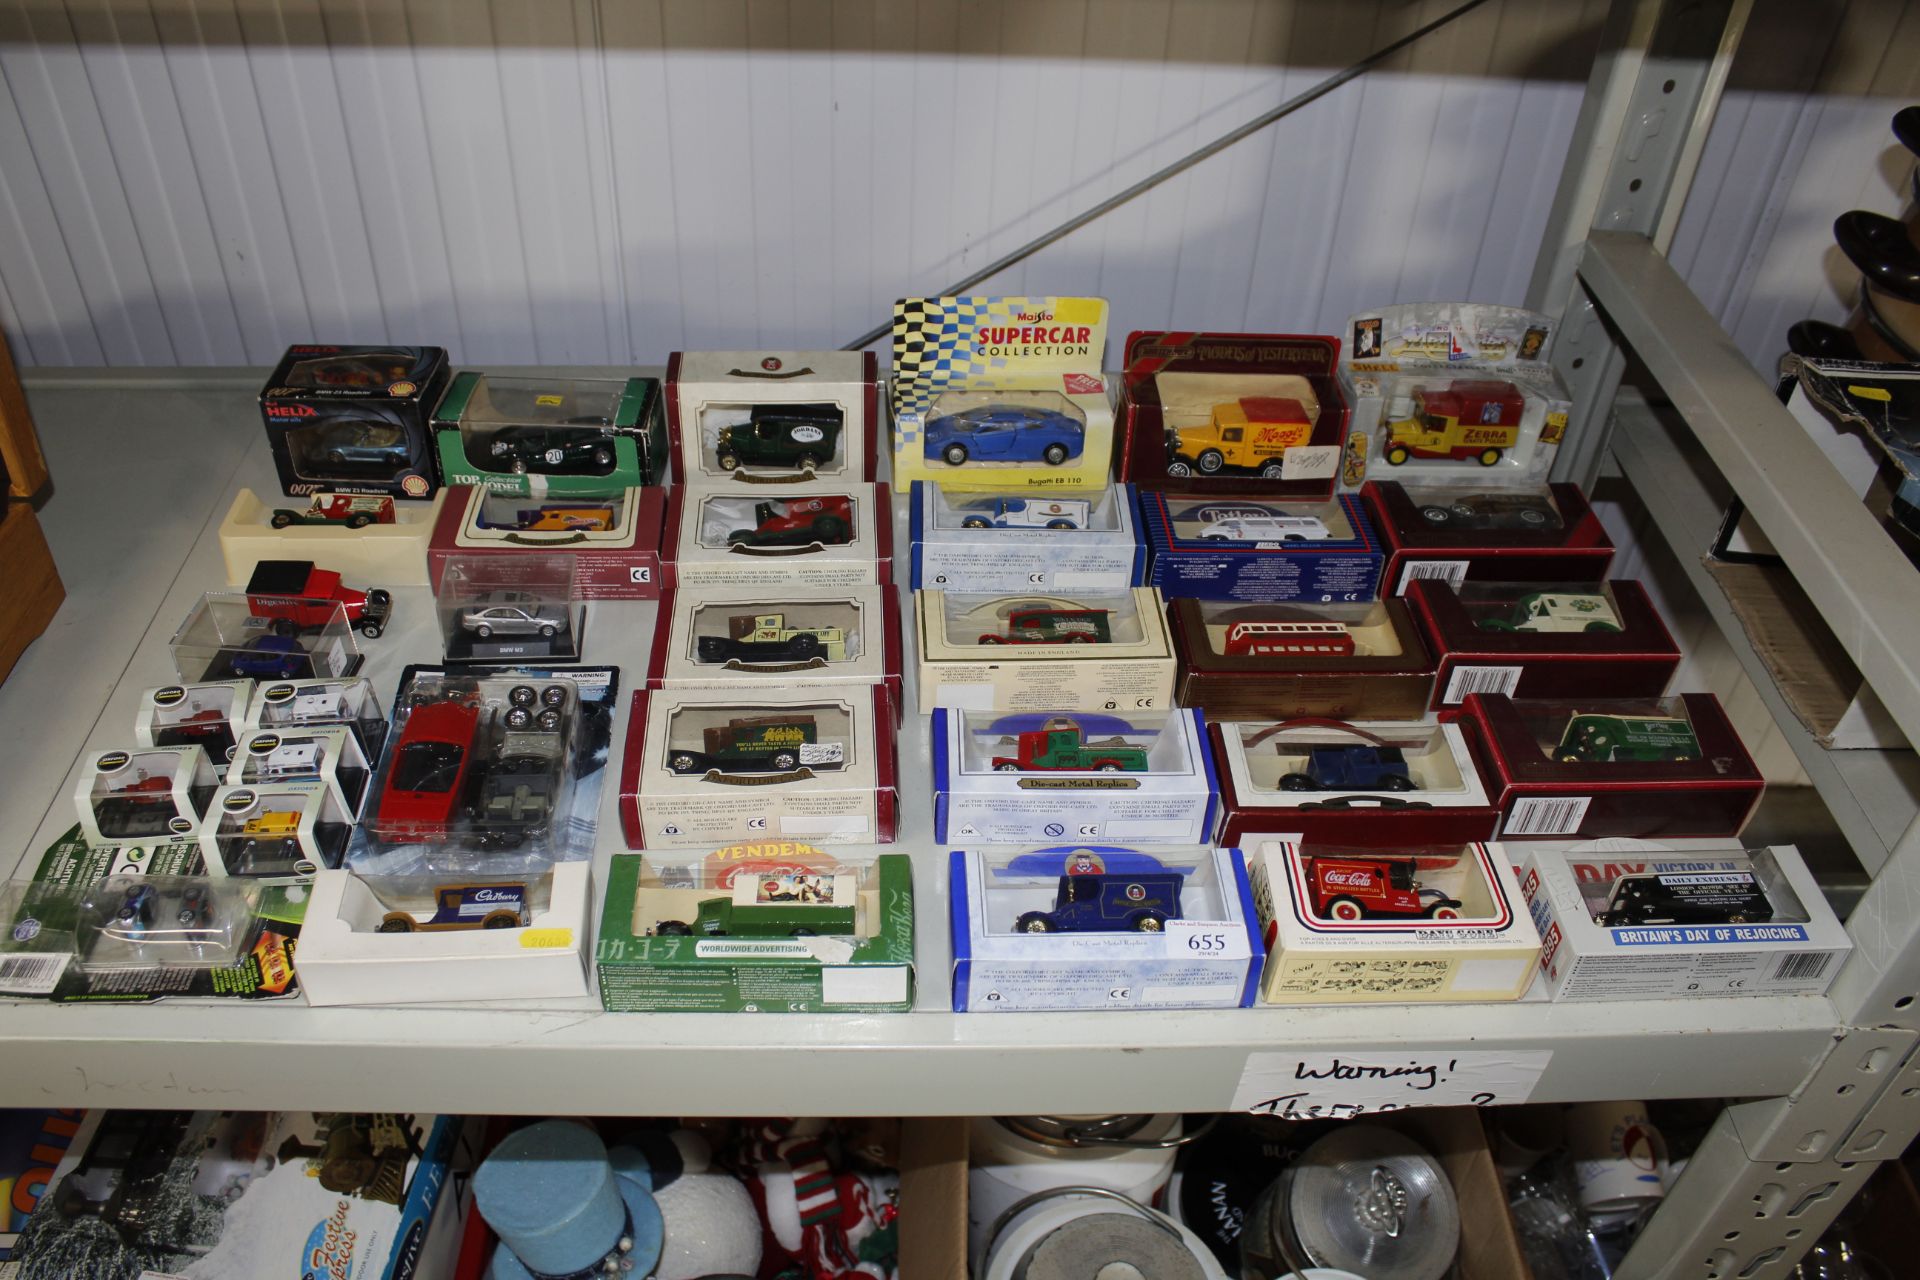 A quantity of Diecast vehicles including models of